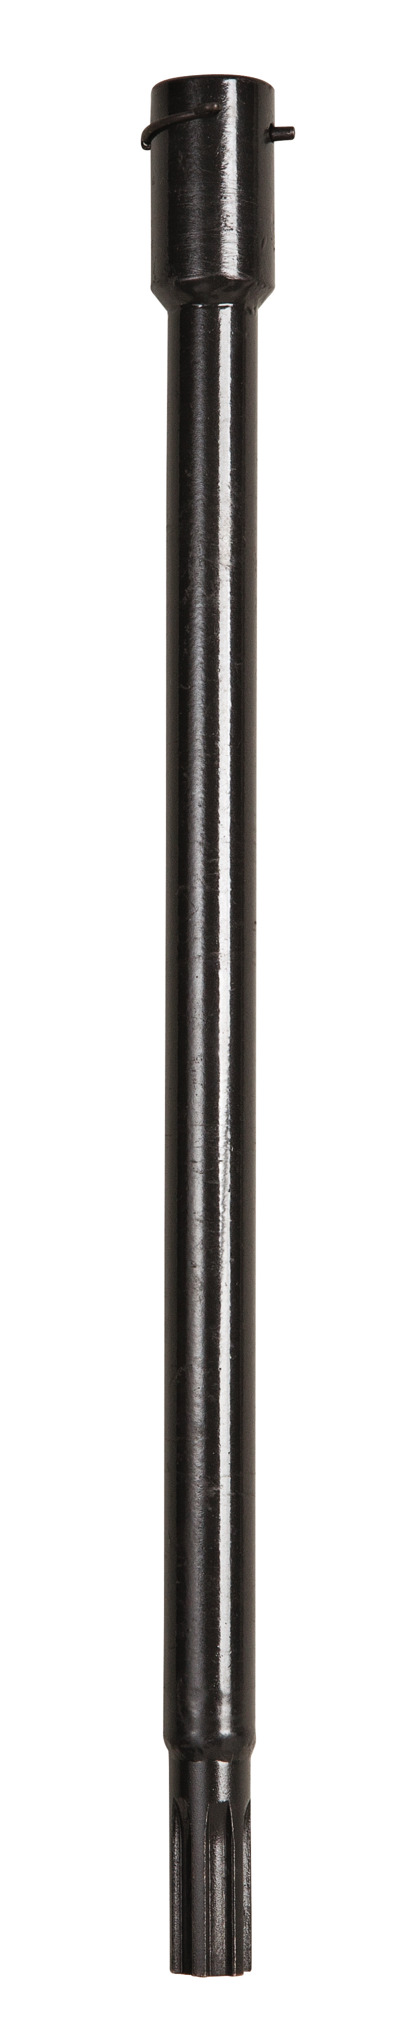 Shaft extension lengthens for the earth auger.